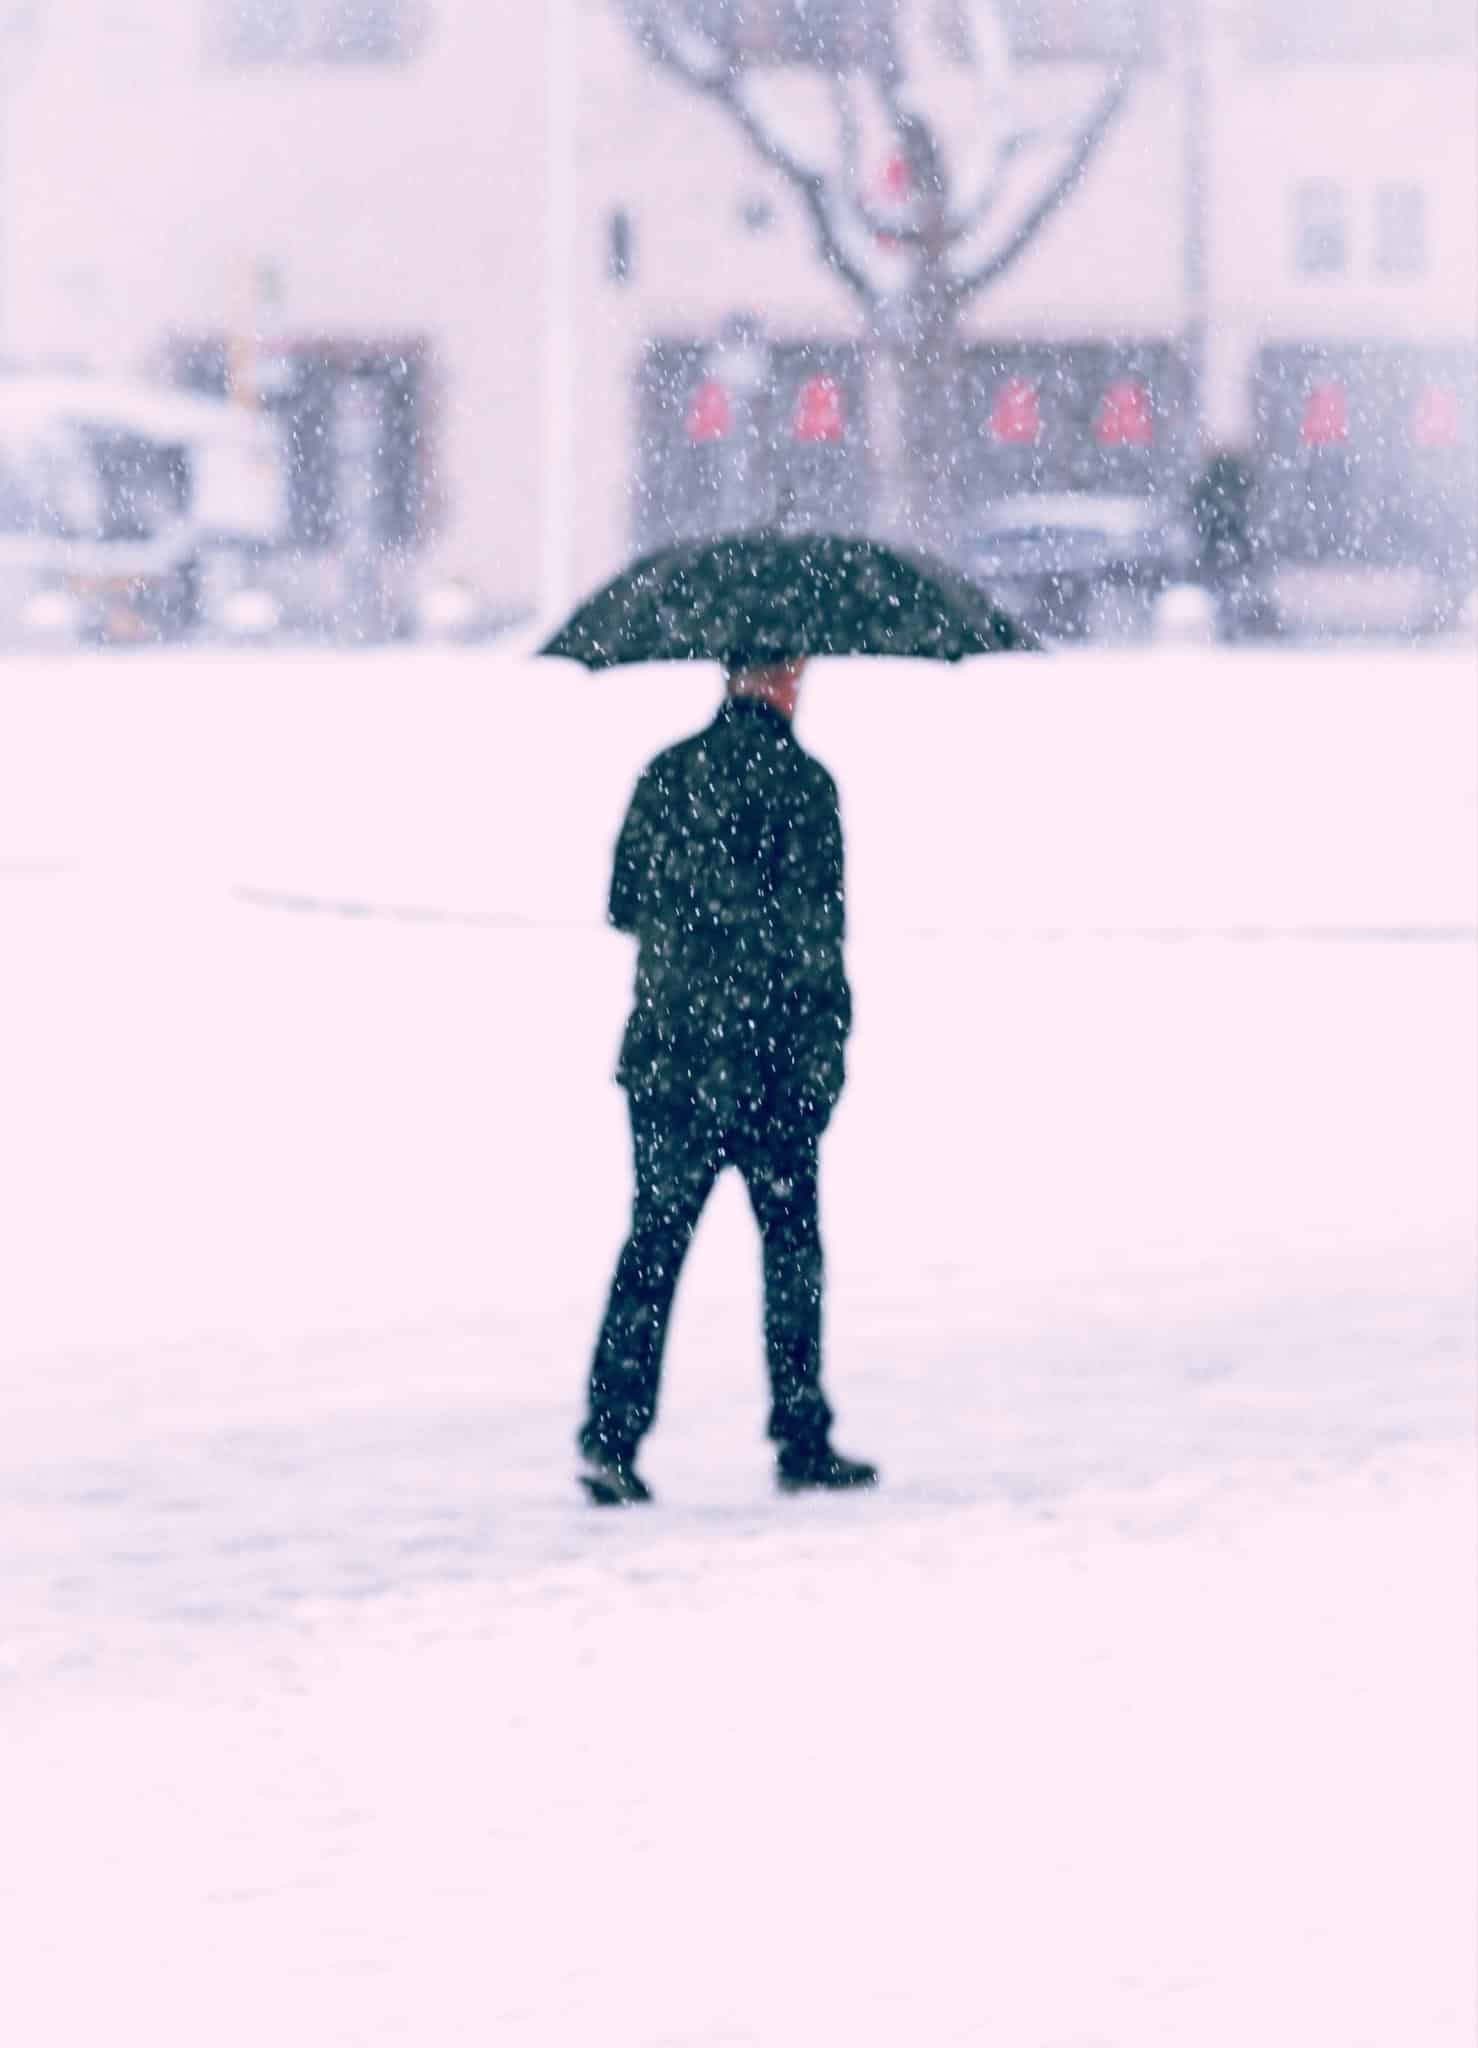 Man walking with umbrella in the snow.